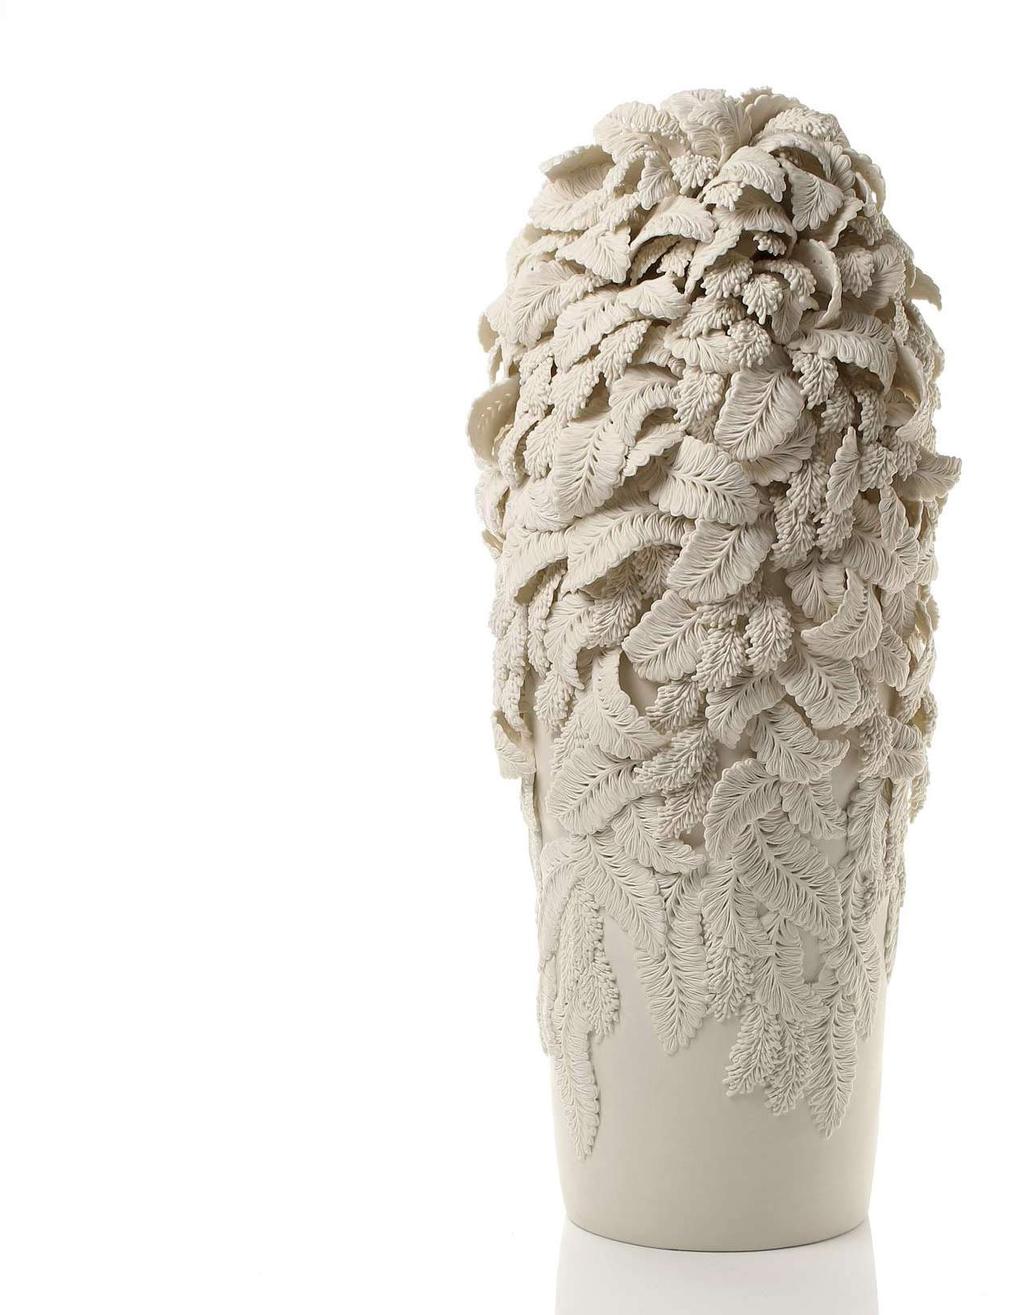 A Large Wisteria Tower, 2012 Moulded, carved and hand-built porcelain with dancing